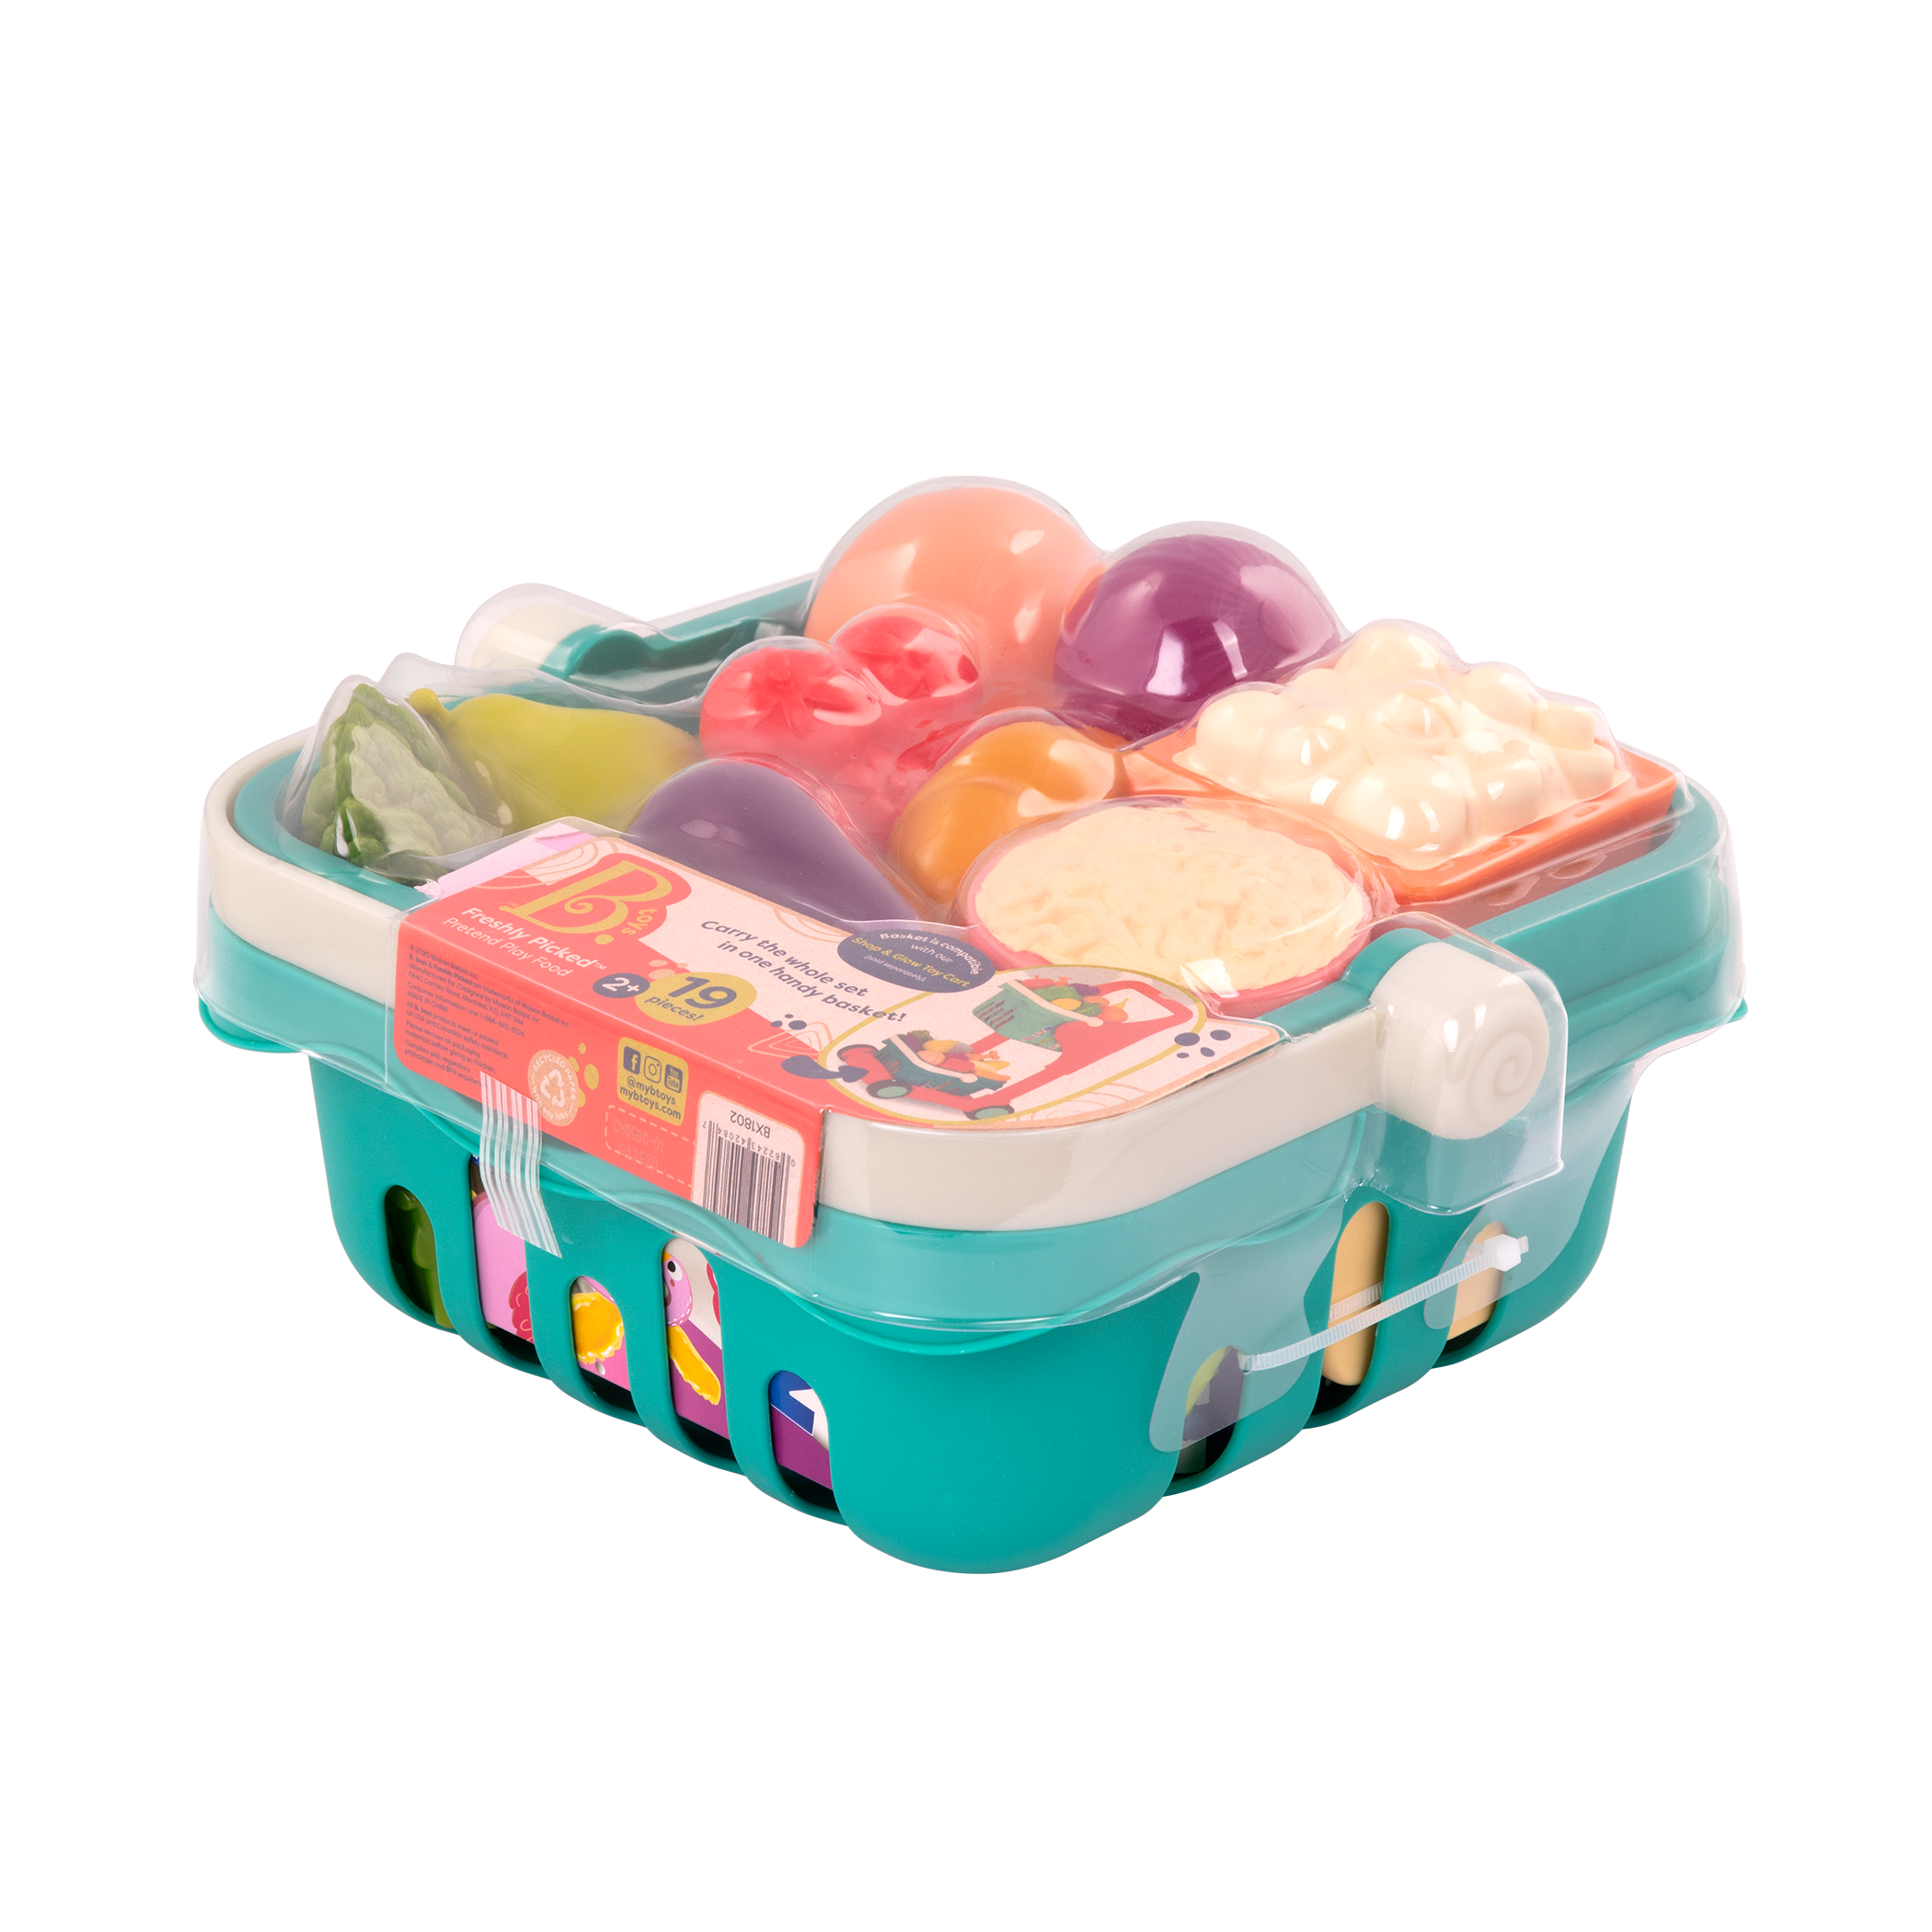 Goodbyn Kids Small Lunch Box Container Review - City of Creative